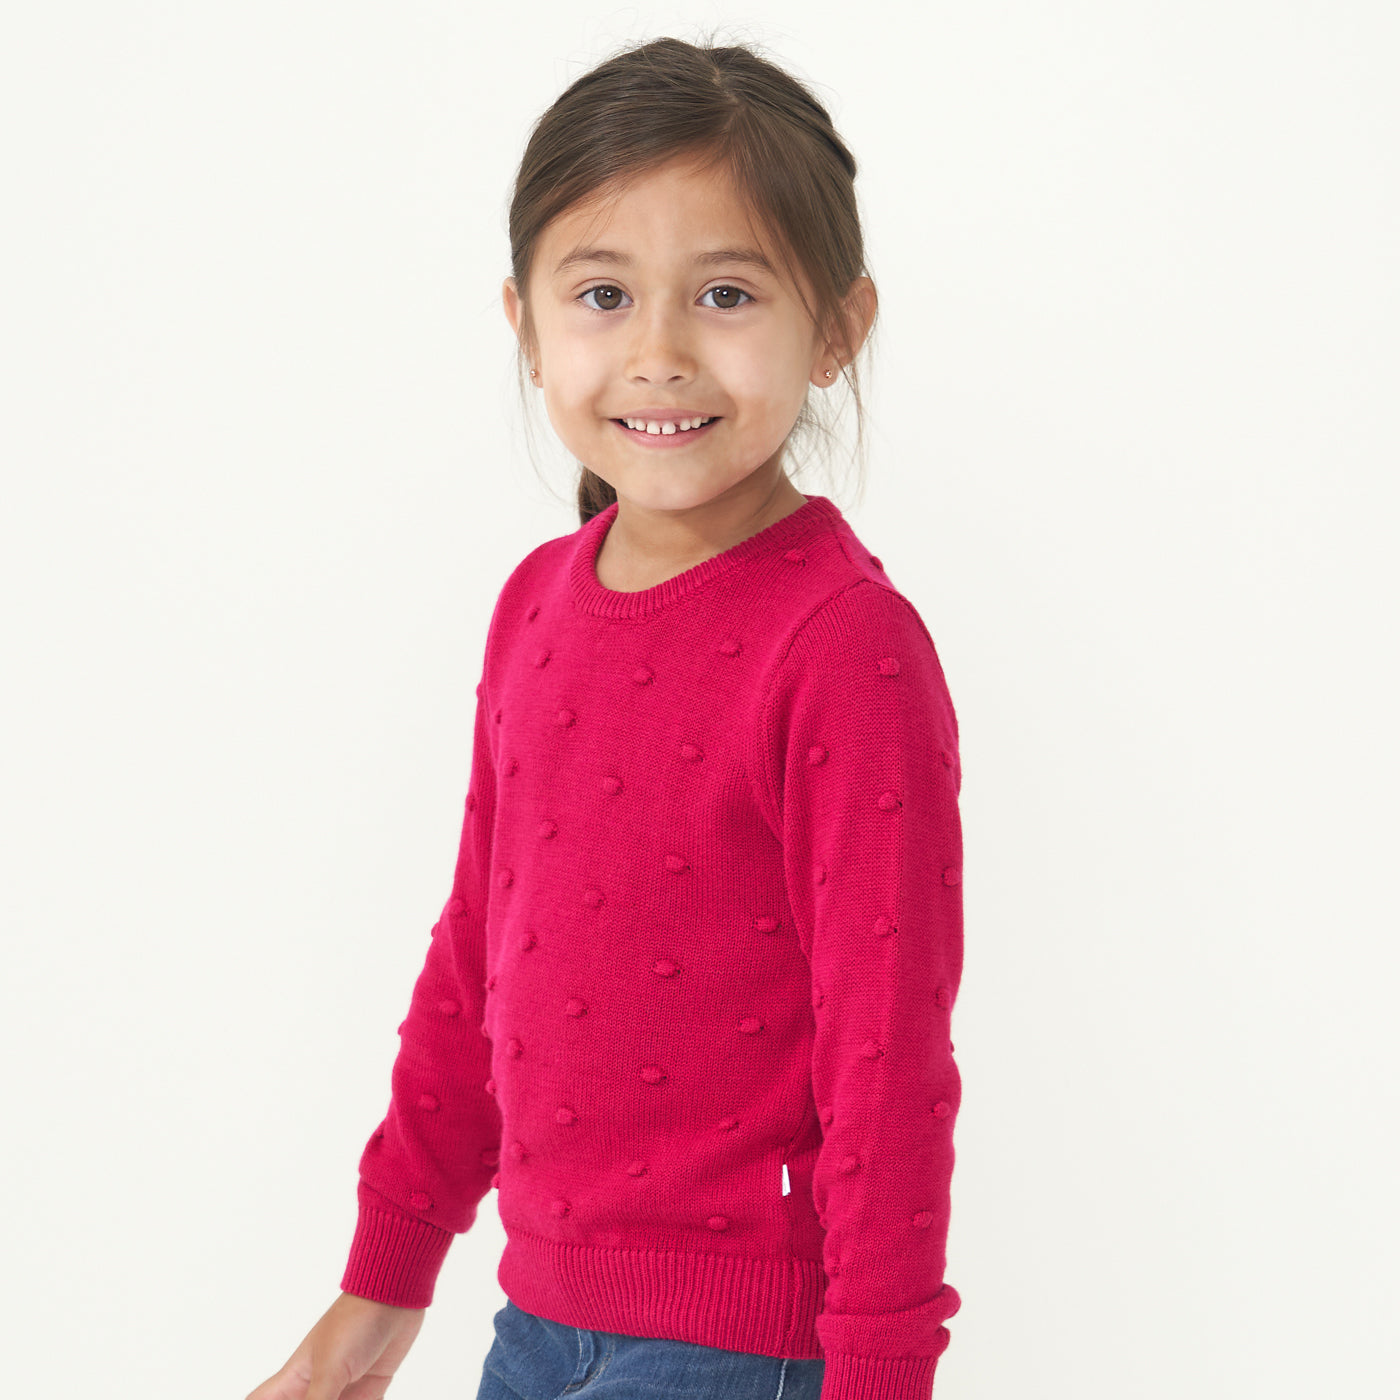 profile view of a child wearing a Mixed Berry Pom Pom sweater